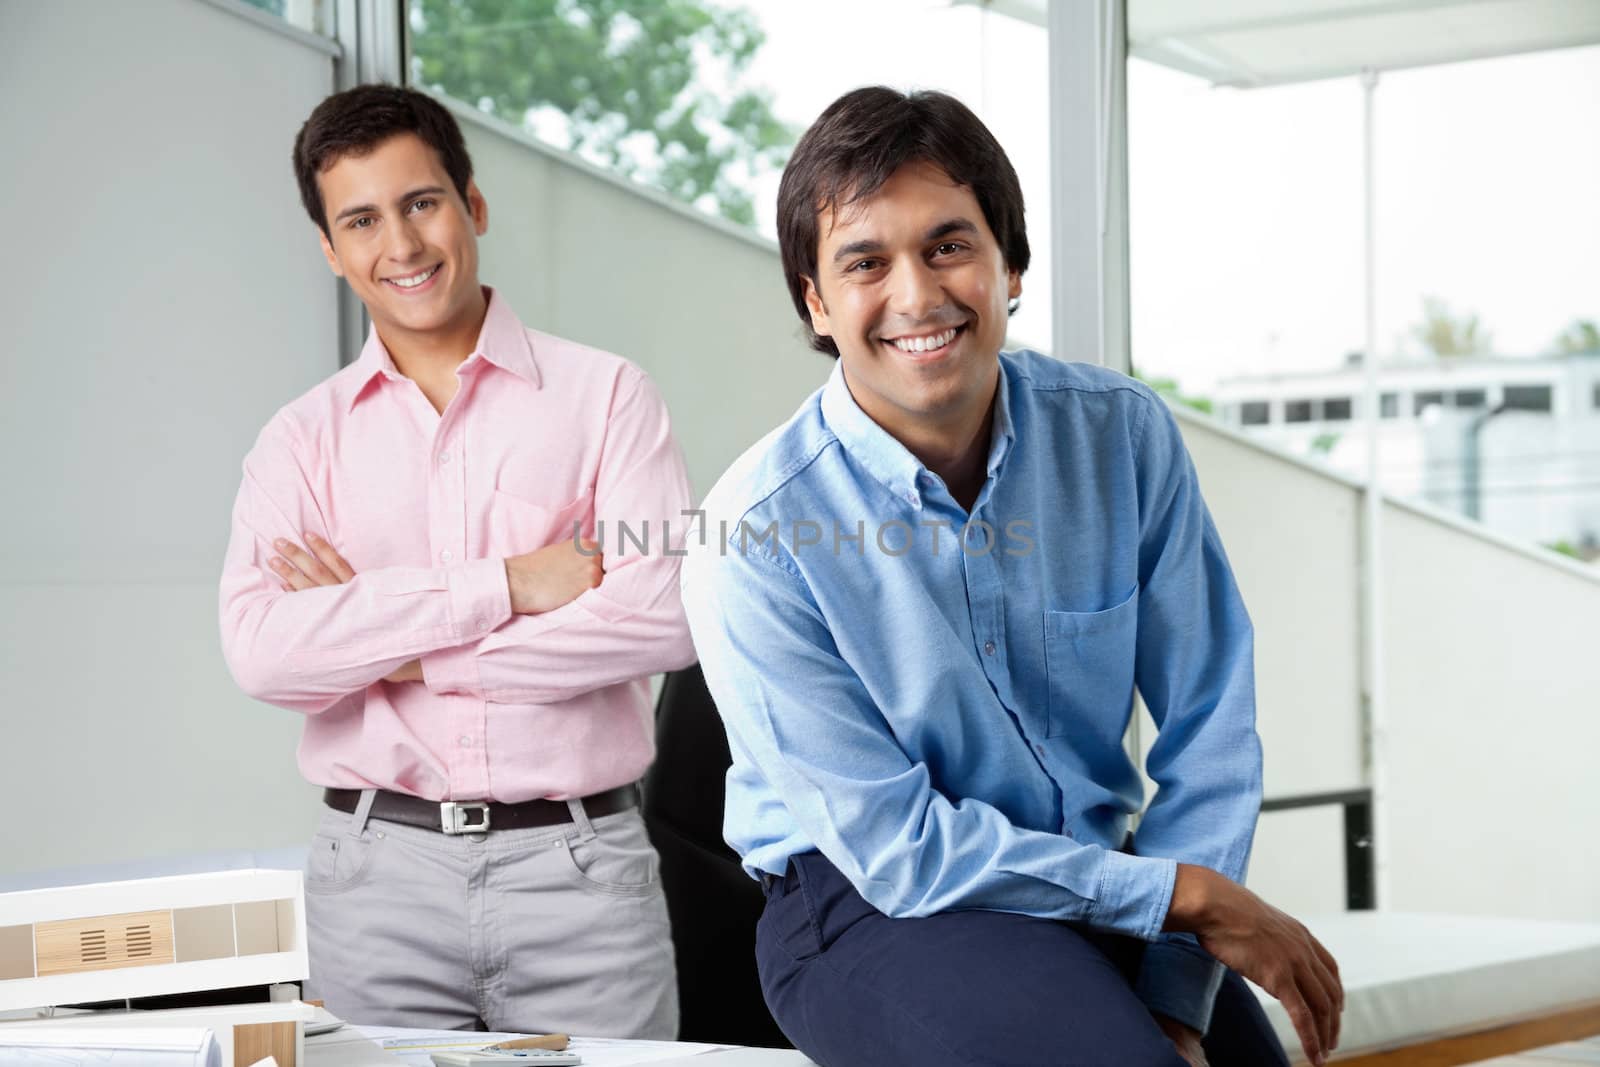 Portrait of young male architect smiling while colleague stands with arms crossed in background